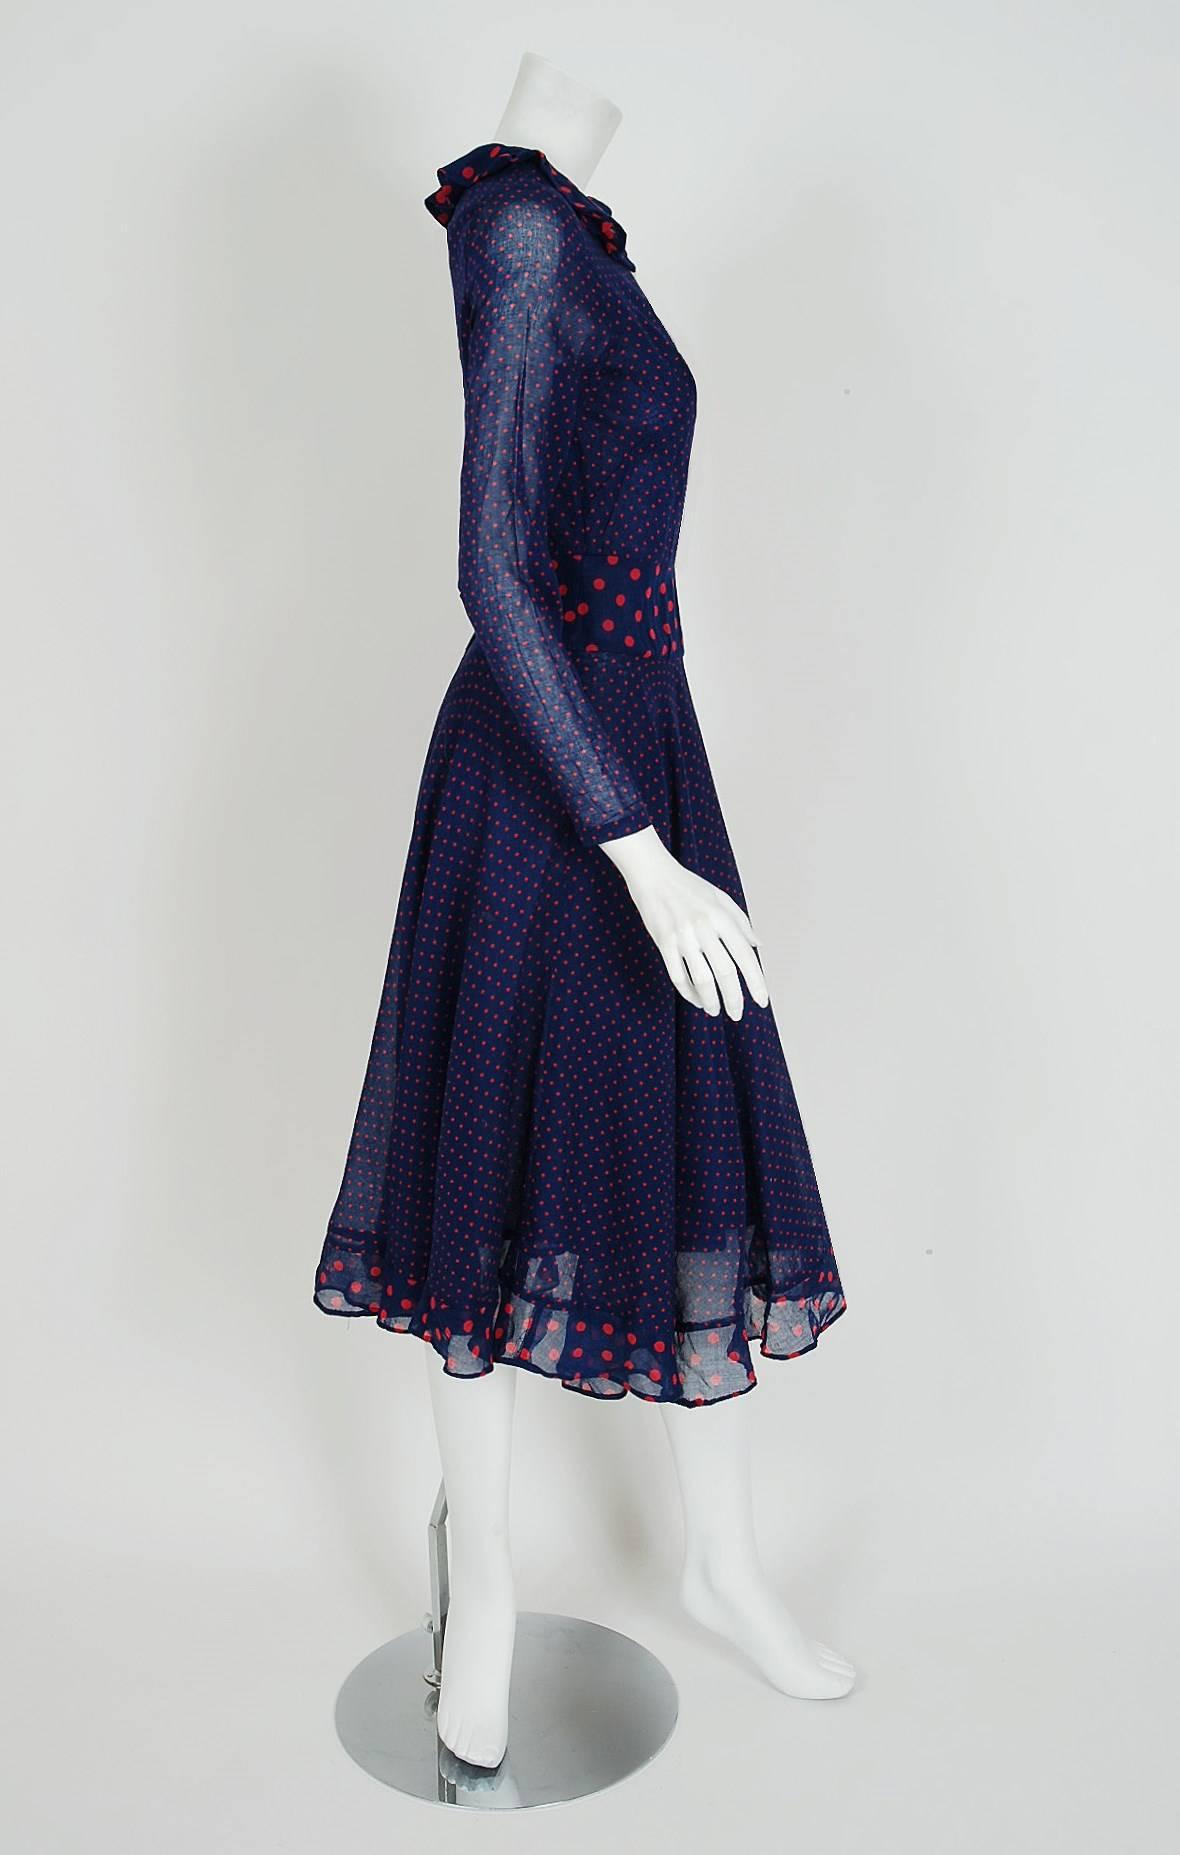 Gorgeous Thea Porter dress fashioned in navy and pink dotted print cotton voile. I love the beautiful color combination and clear nod to 1930's fashion. The silhouette is a flattering nipped waist tea-length with a flowing swing-skirt. I adore the